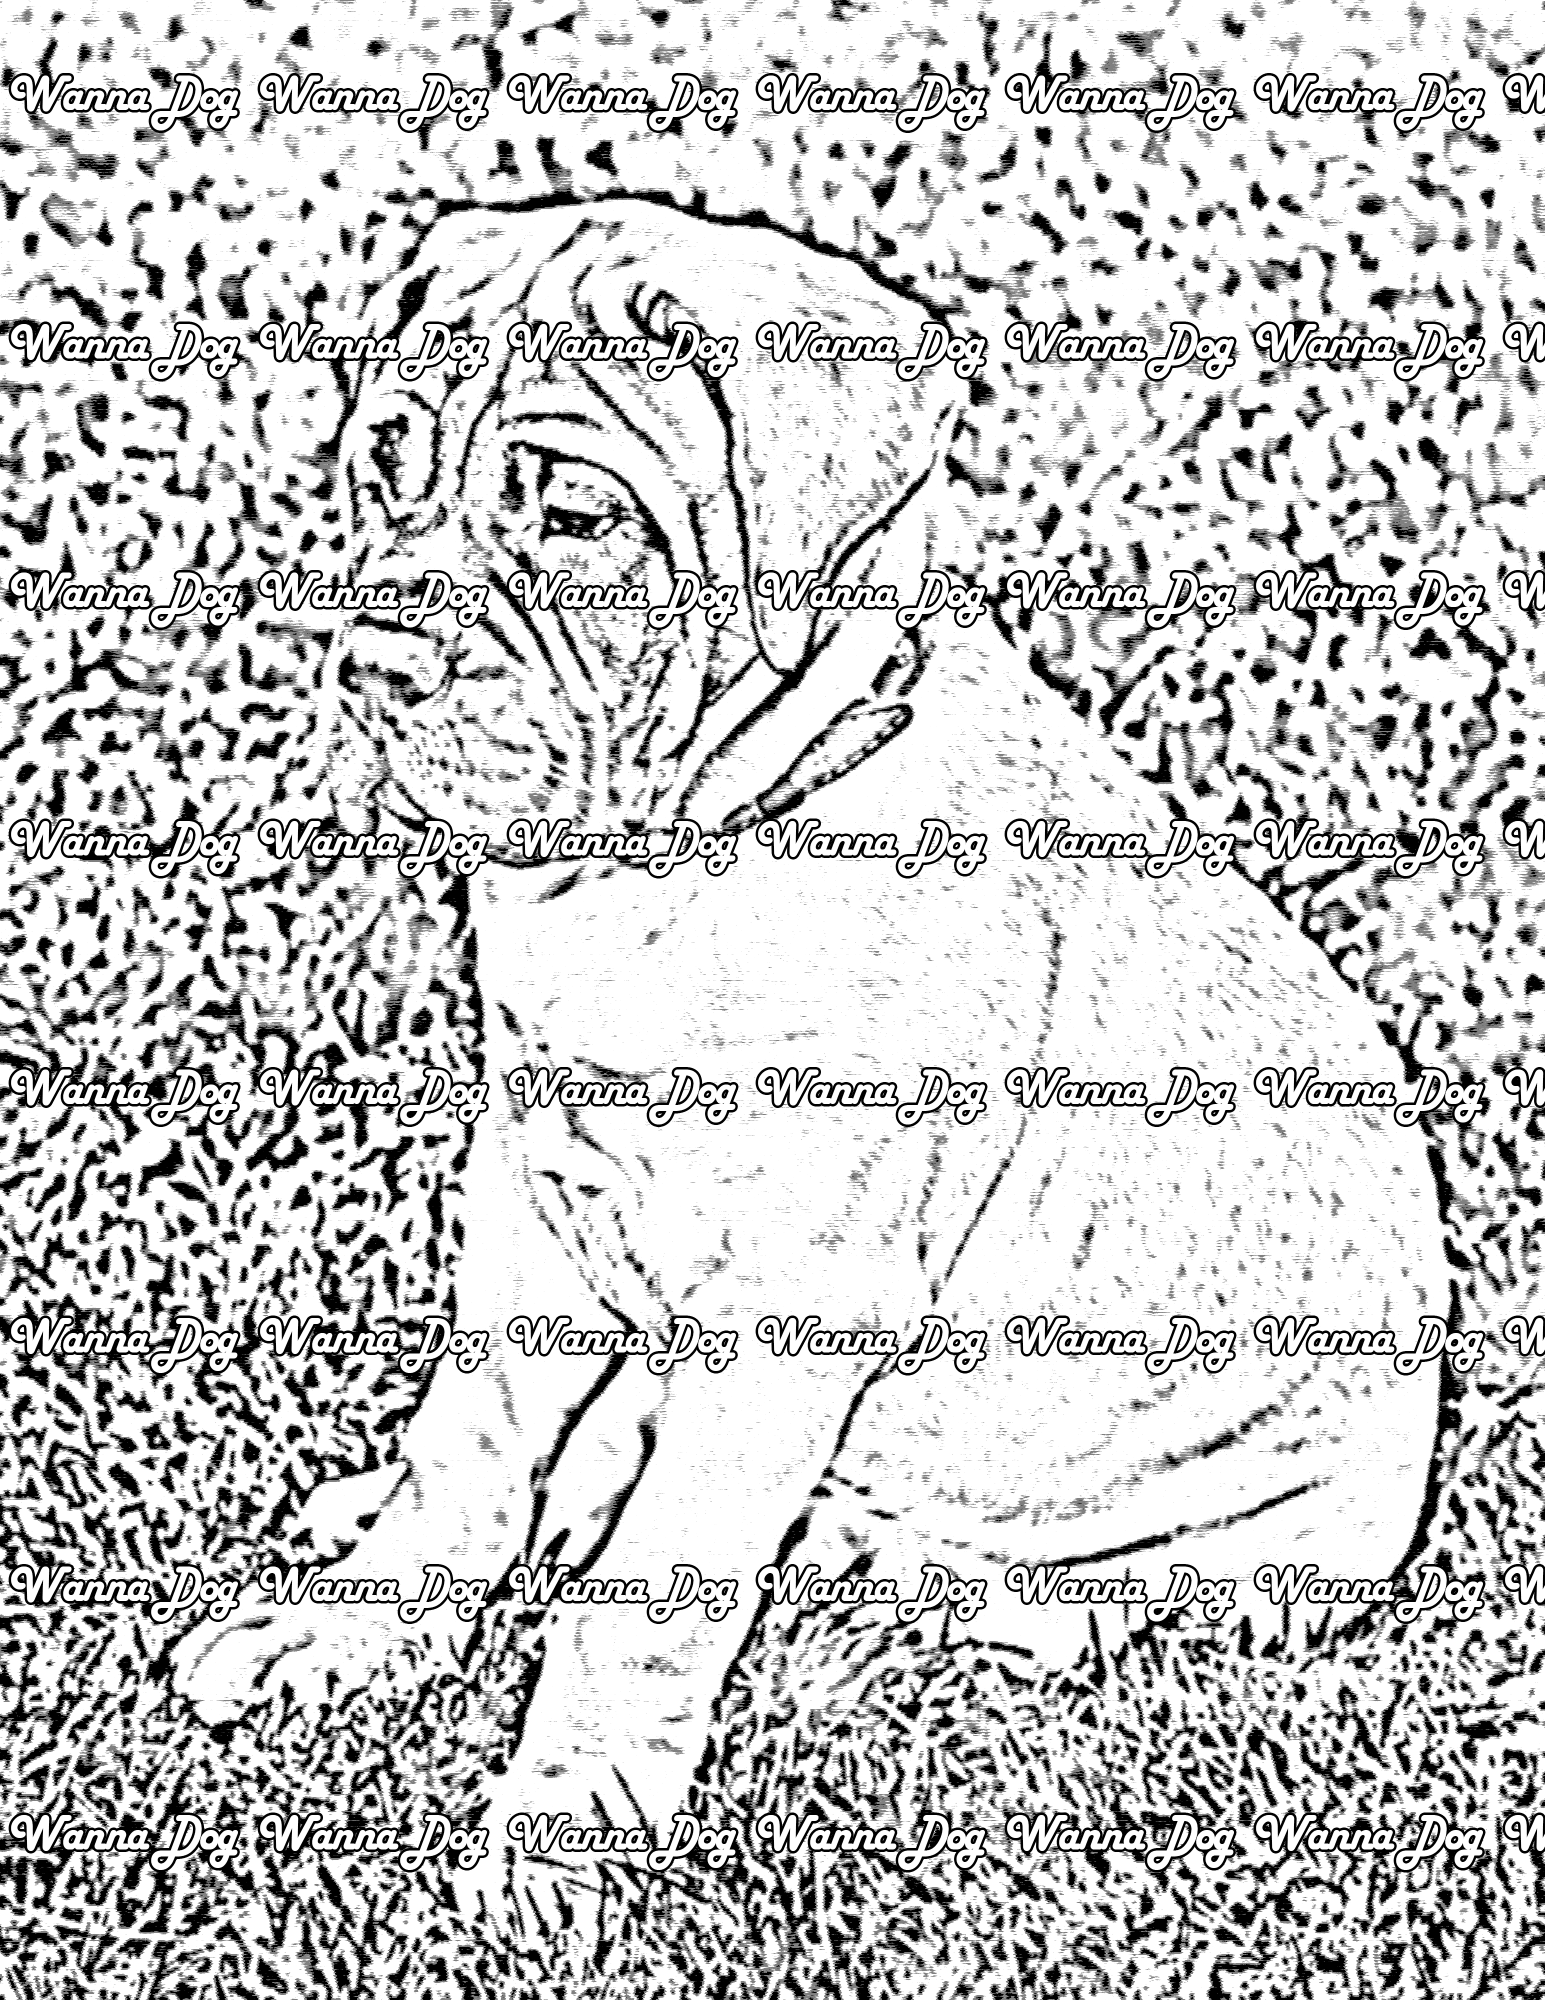 Bullmastiff Coloring Page of a Bullmastiff puppy sitting on the grass